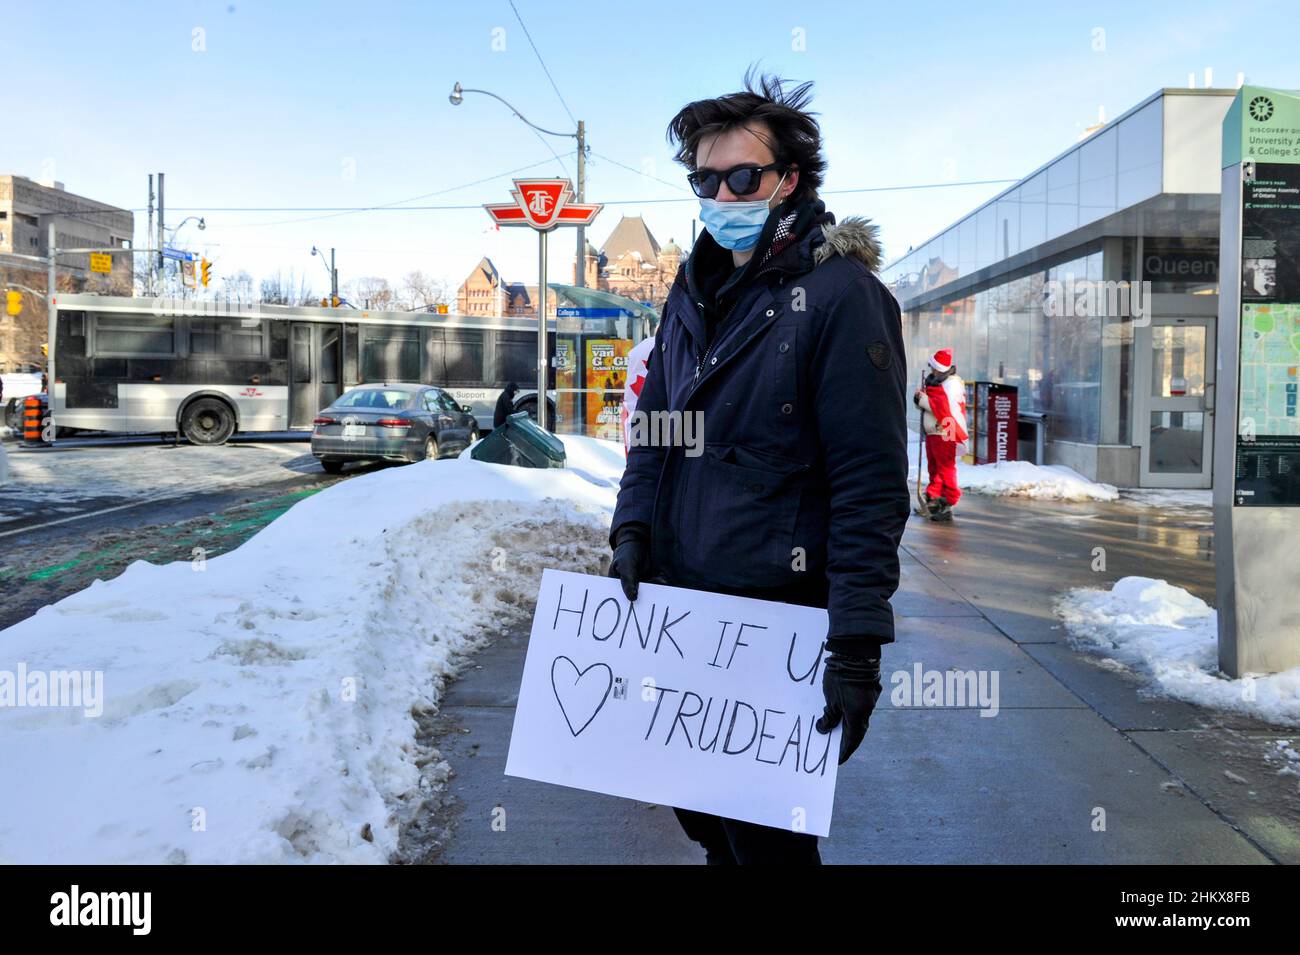 February 5, 2022. Toronto, Canada. Counter protester carries signage in support of health care workers during the Toronto's Freedom Convoy protest. Stock Photo